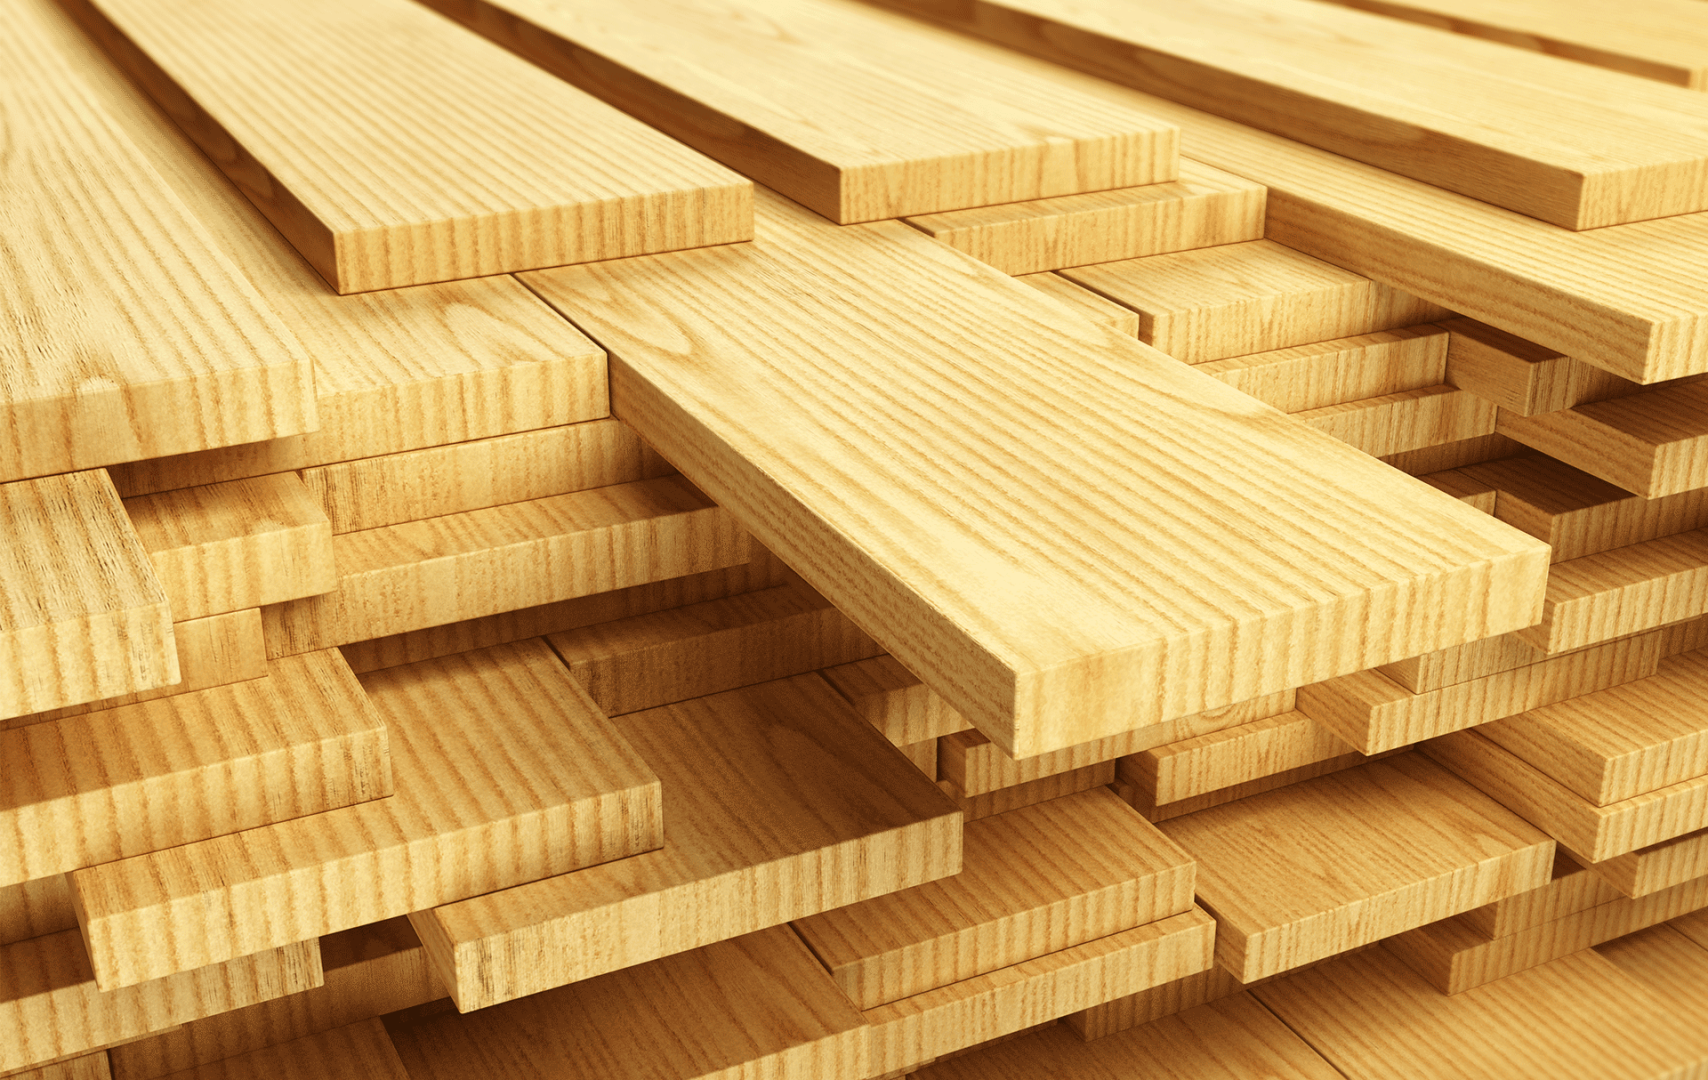 Azerbaijan is among top three countries that import lumber from Belarus